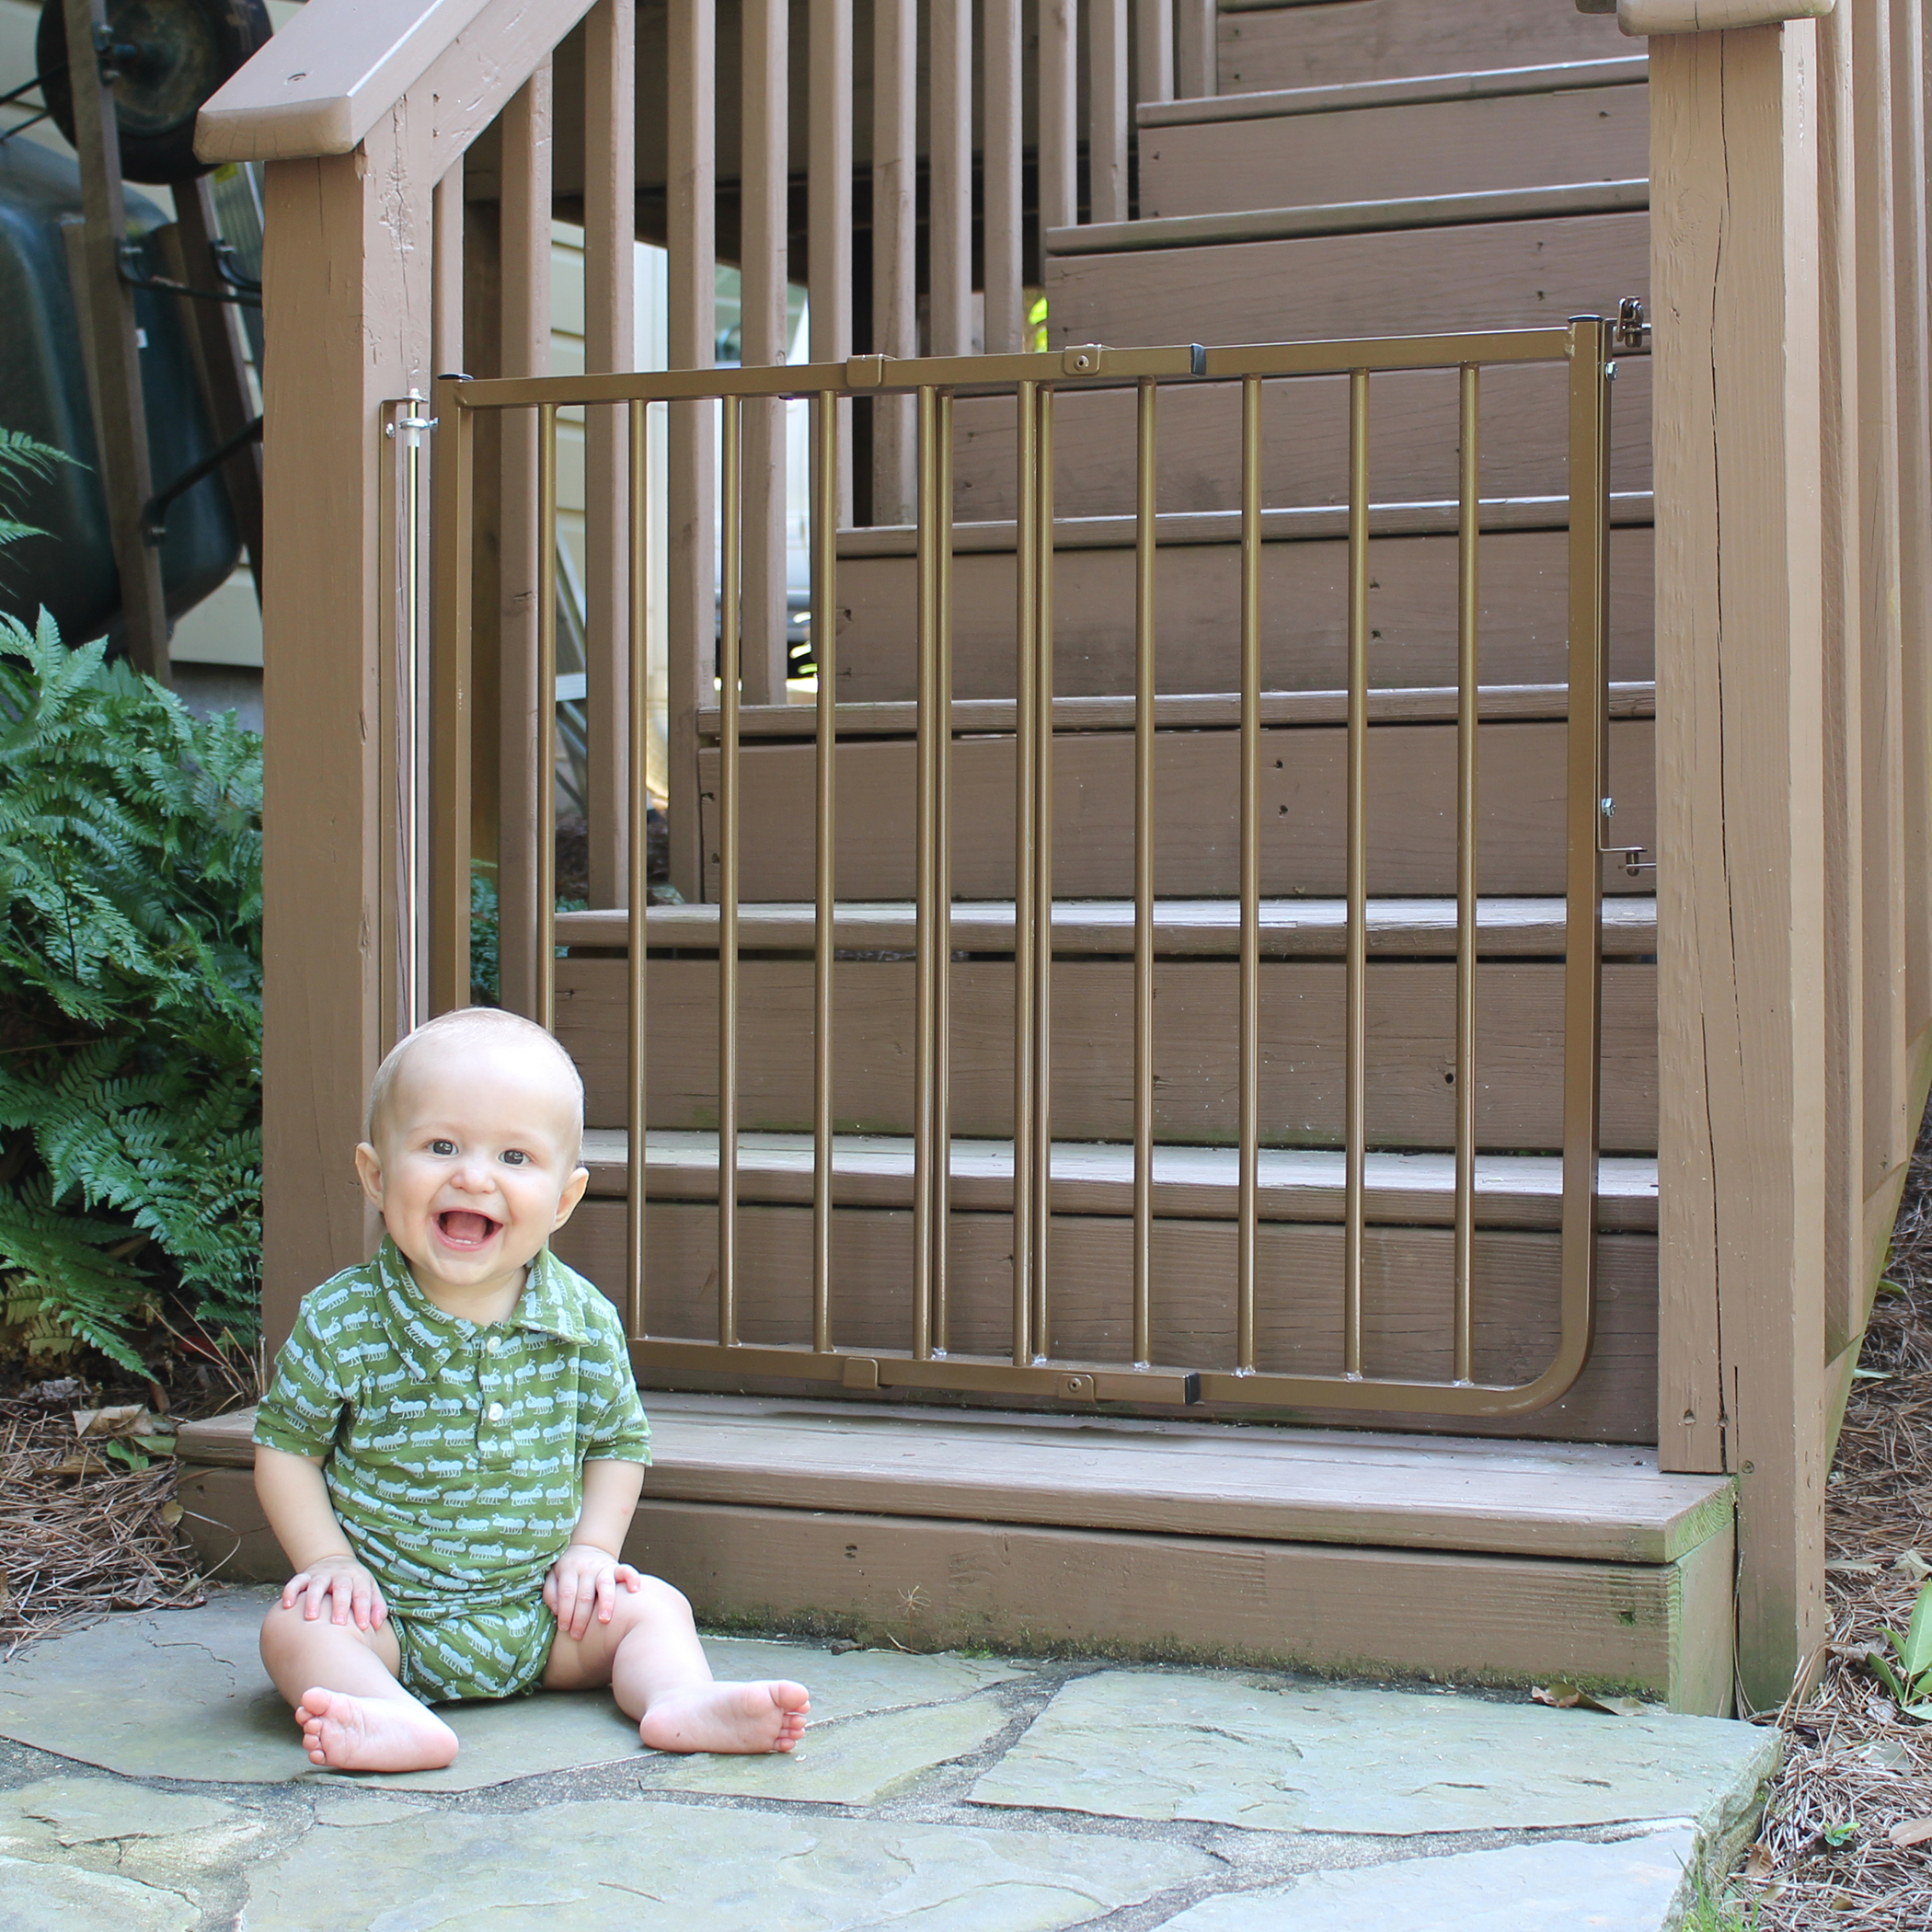 Cardinal Gates Stairway Special Outdoor Child Safety Gate - image 1 of 5